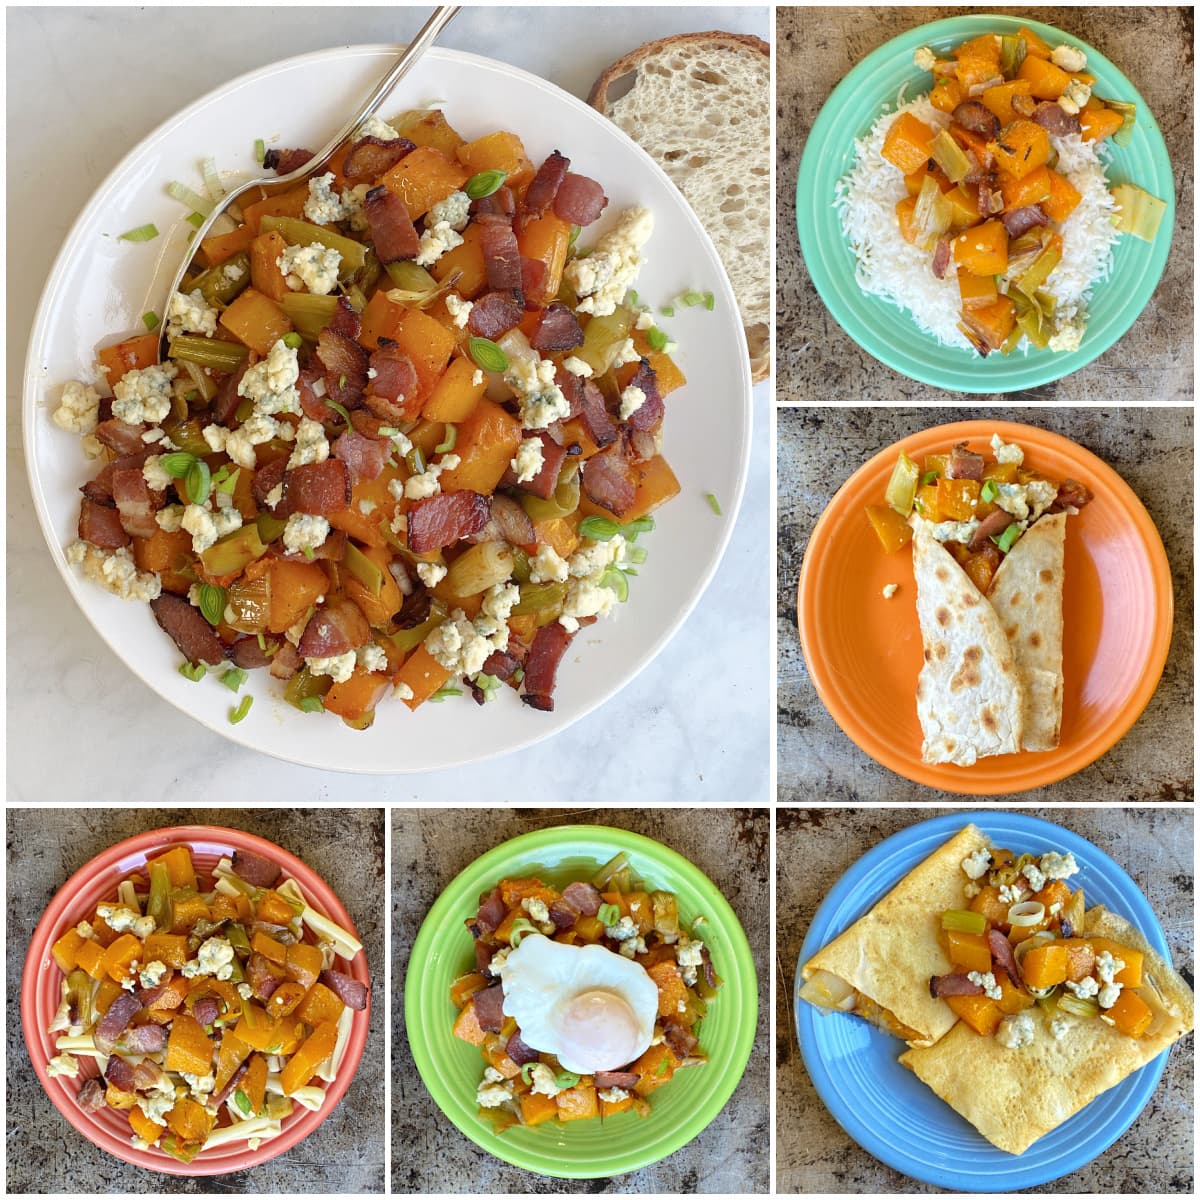 Collage: one large image of a plate of butternut squash, bacon, blue cheese, and leeks, plus smaller images, each showing a different serving option: butternut over rice, in a tortilla, in an omelet, topped with a poached egg, and over pasta.